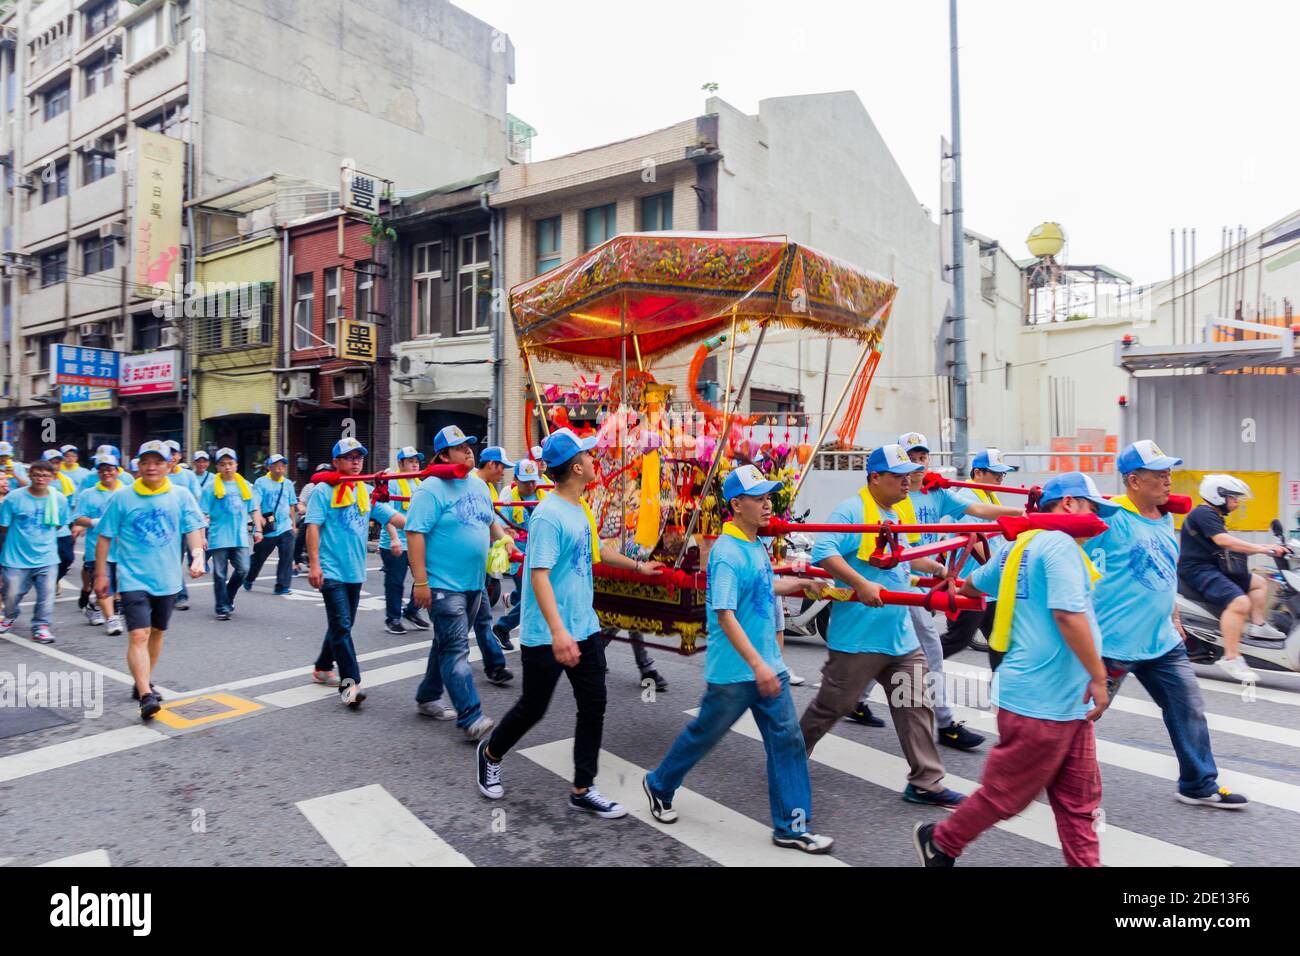 Religious procession at the streets during the Bao Sheng Cultural Festival in Taipei, Taiwan Stock Photo